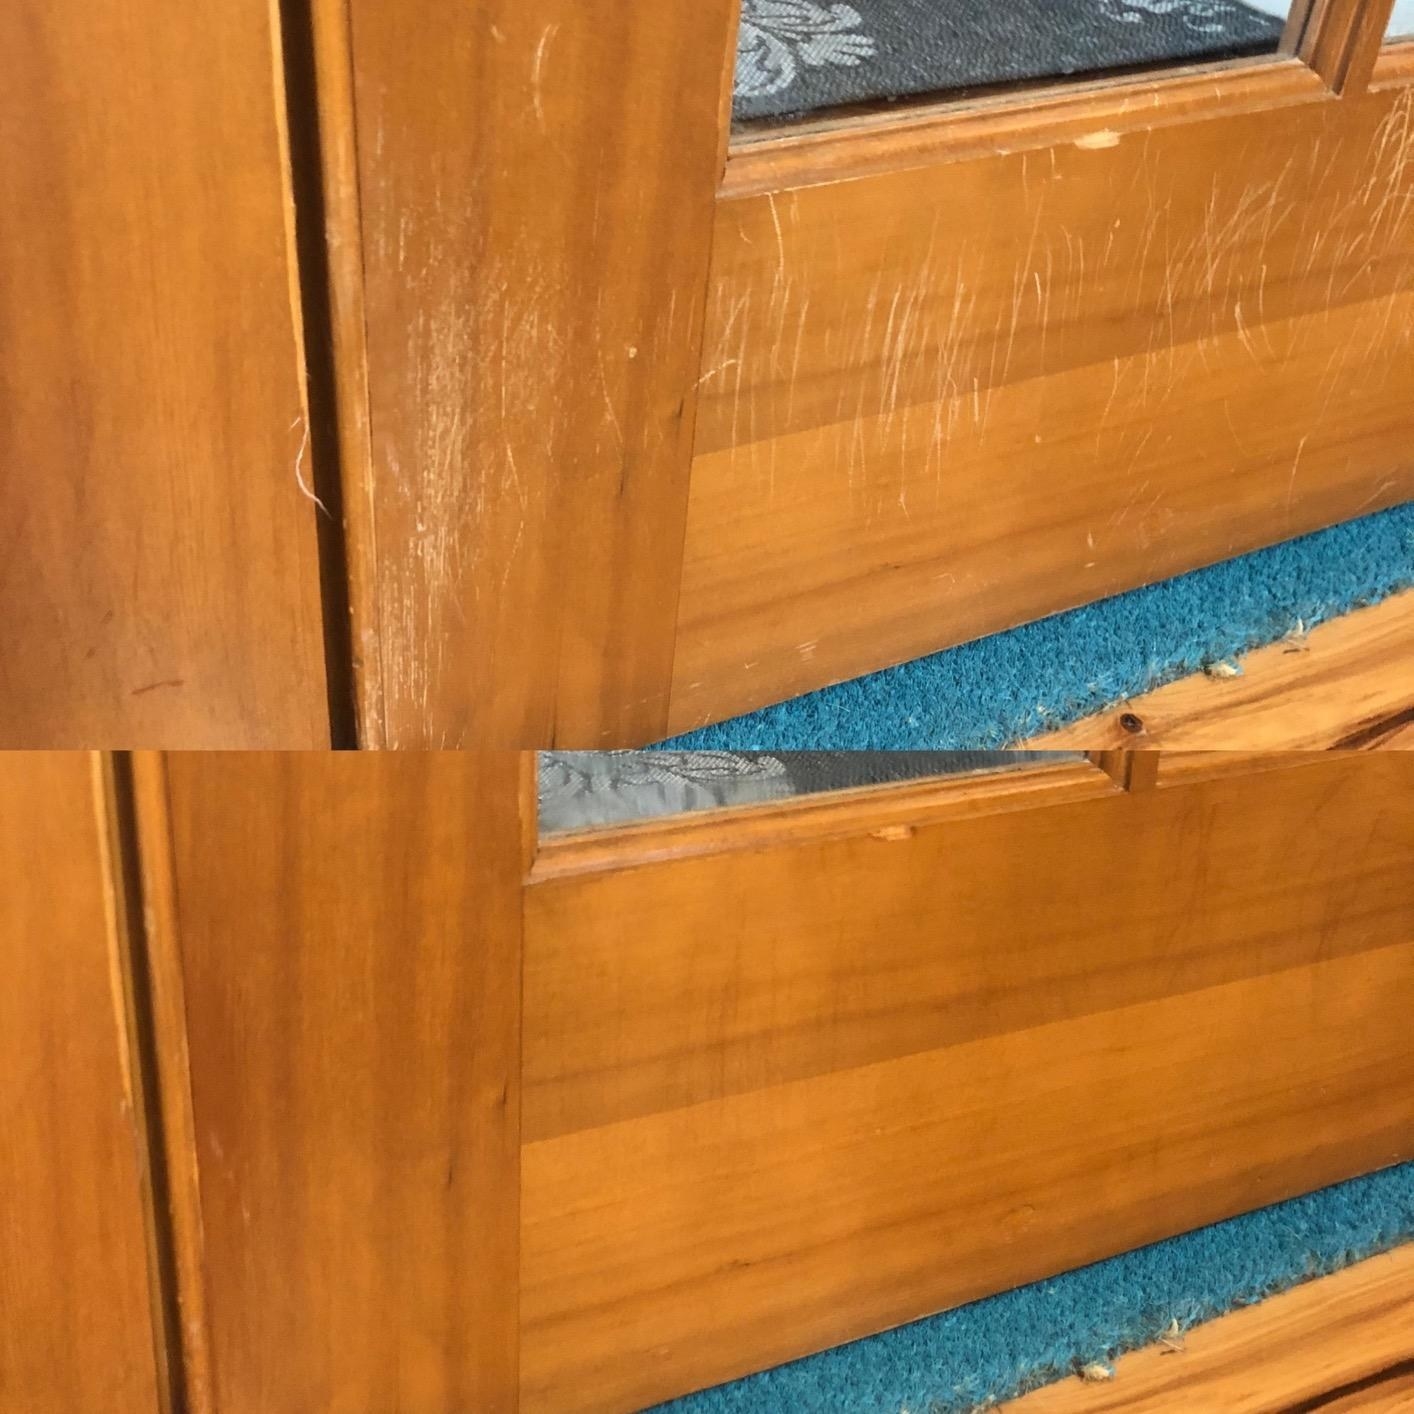 Before and after showing the scratch marks along the base of a door completely removed with the wood polish